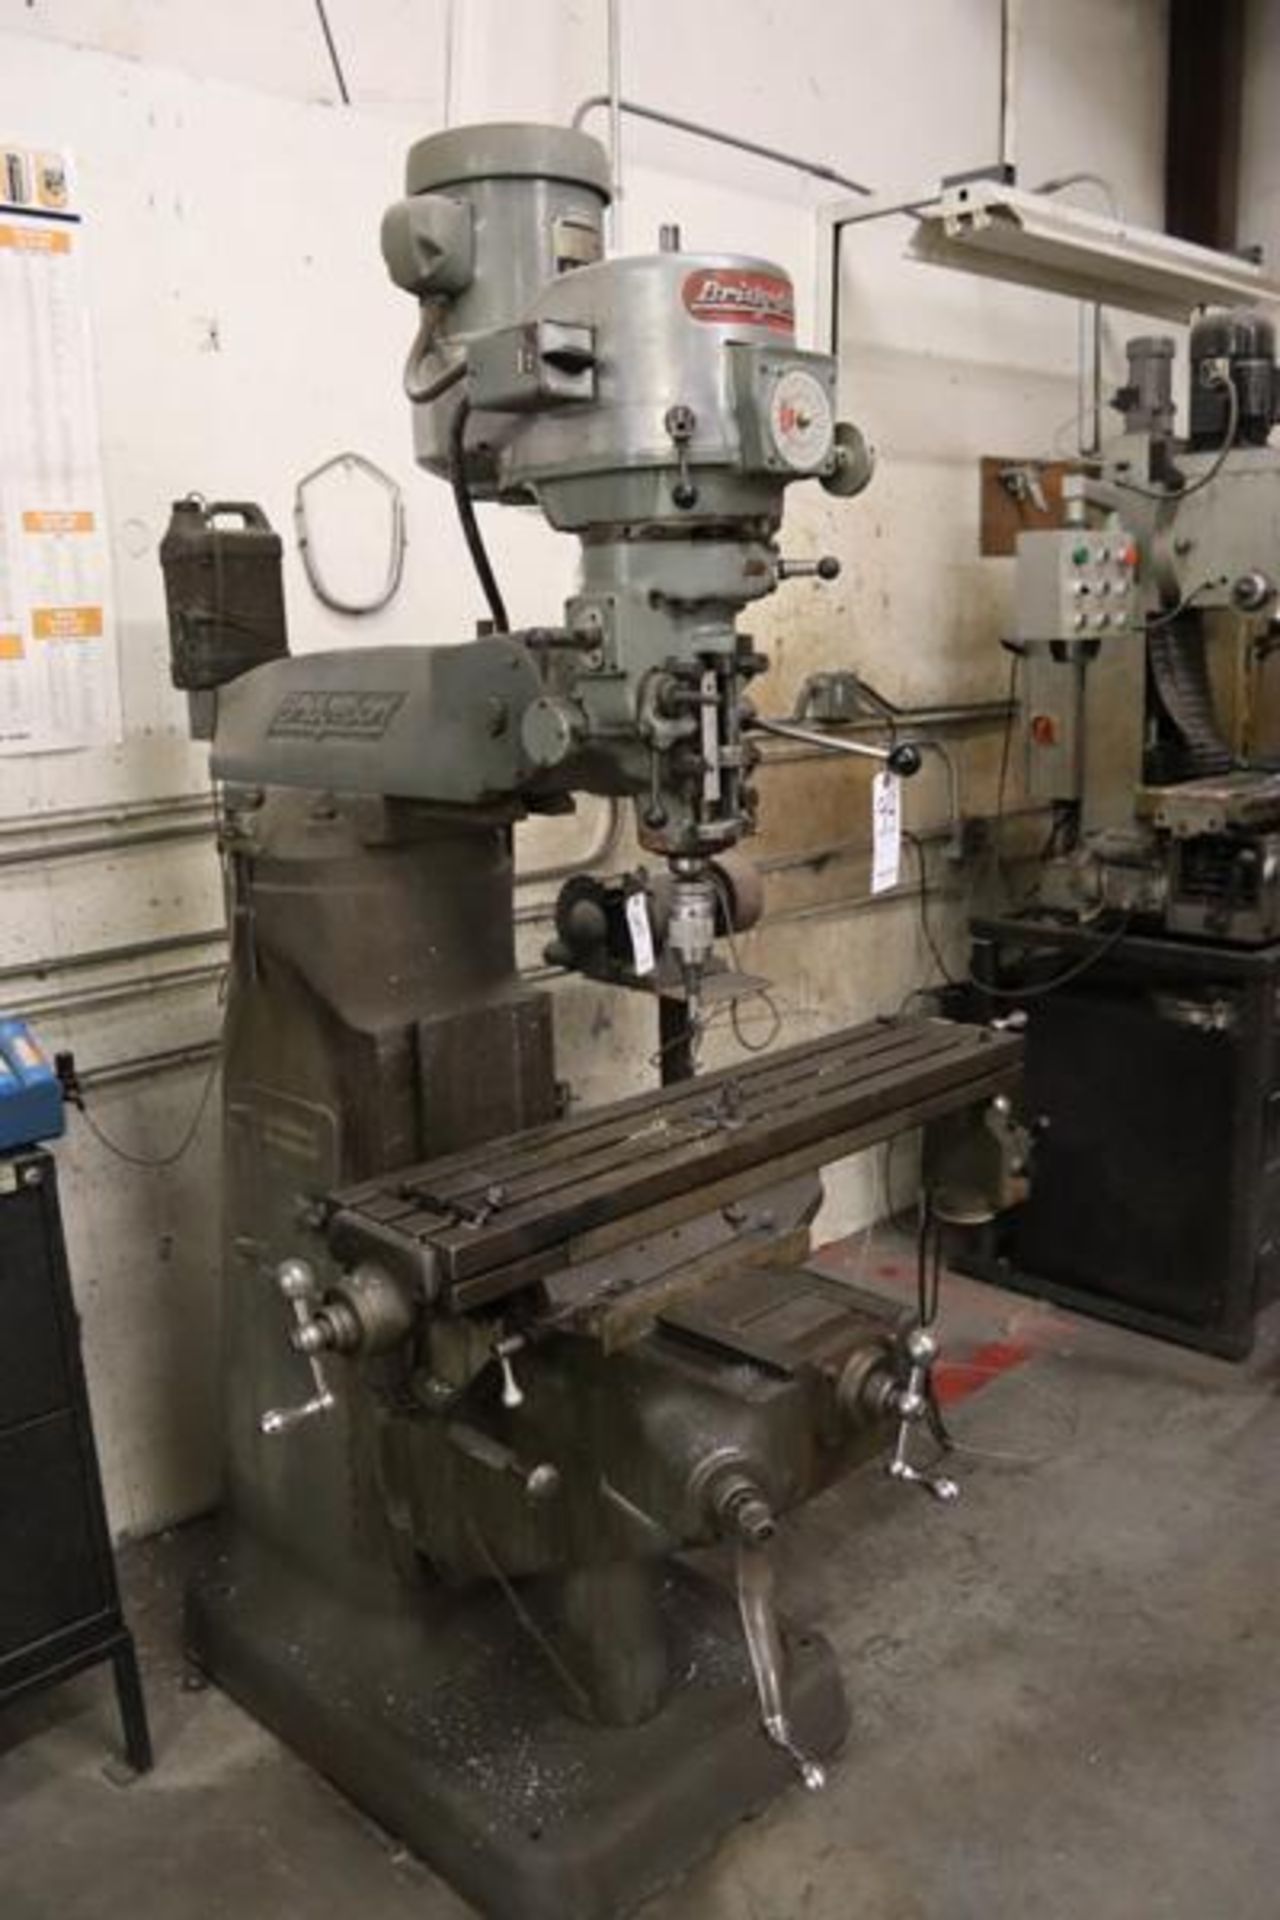 Bridgeport Vertical Mill, 9"x2" Table, Power Cross Feed, 60-4200 RPM, 1-1/2 HP, 3-PH, S/N#12BR-13757 - Image 2 of 3